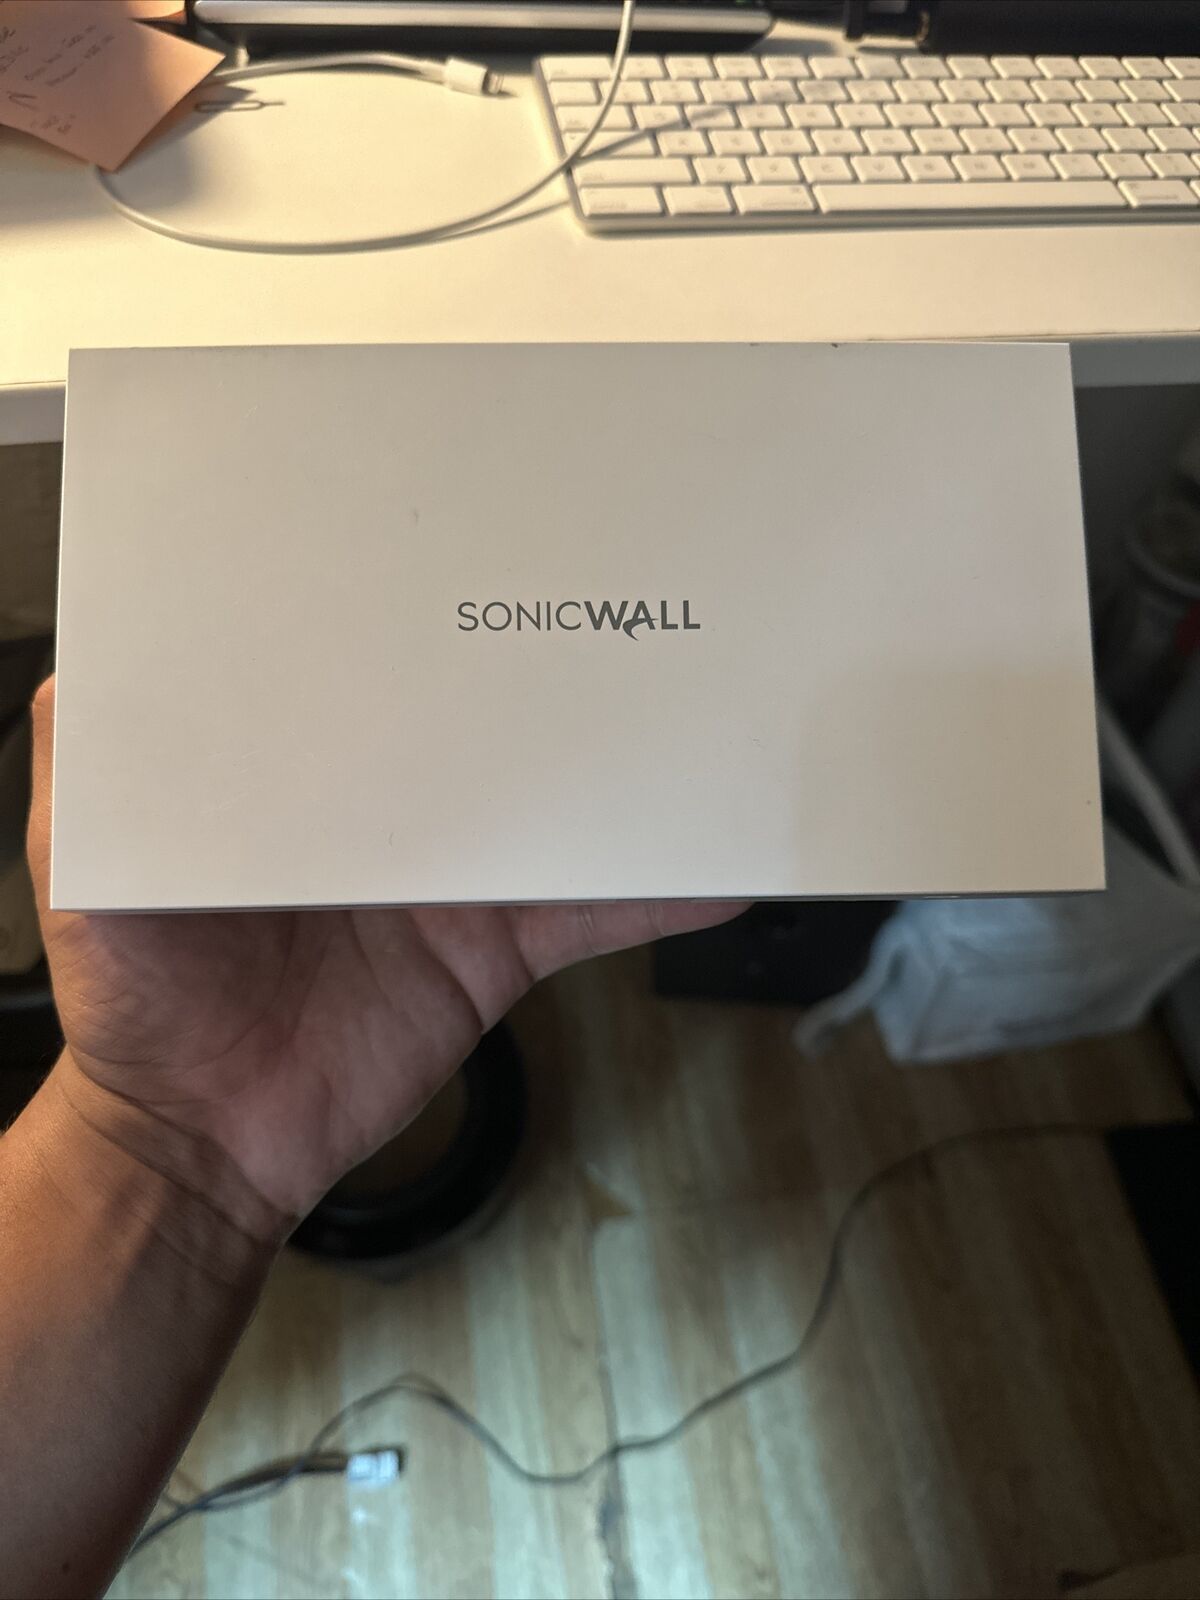 SonicWALL SonicWave 231c Network Security Wireless Access Point - Used